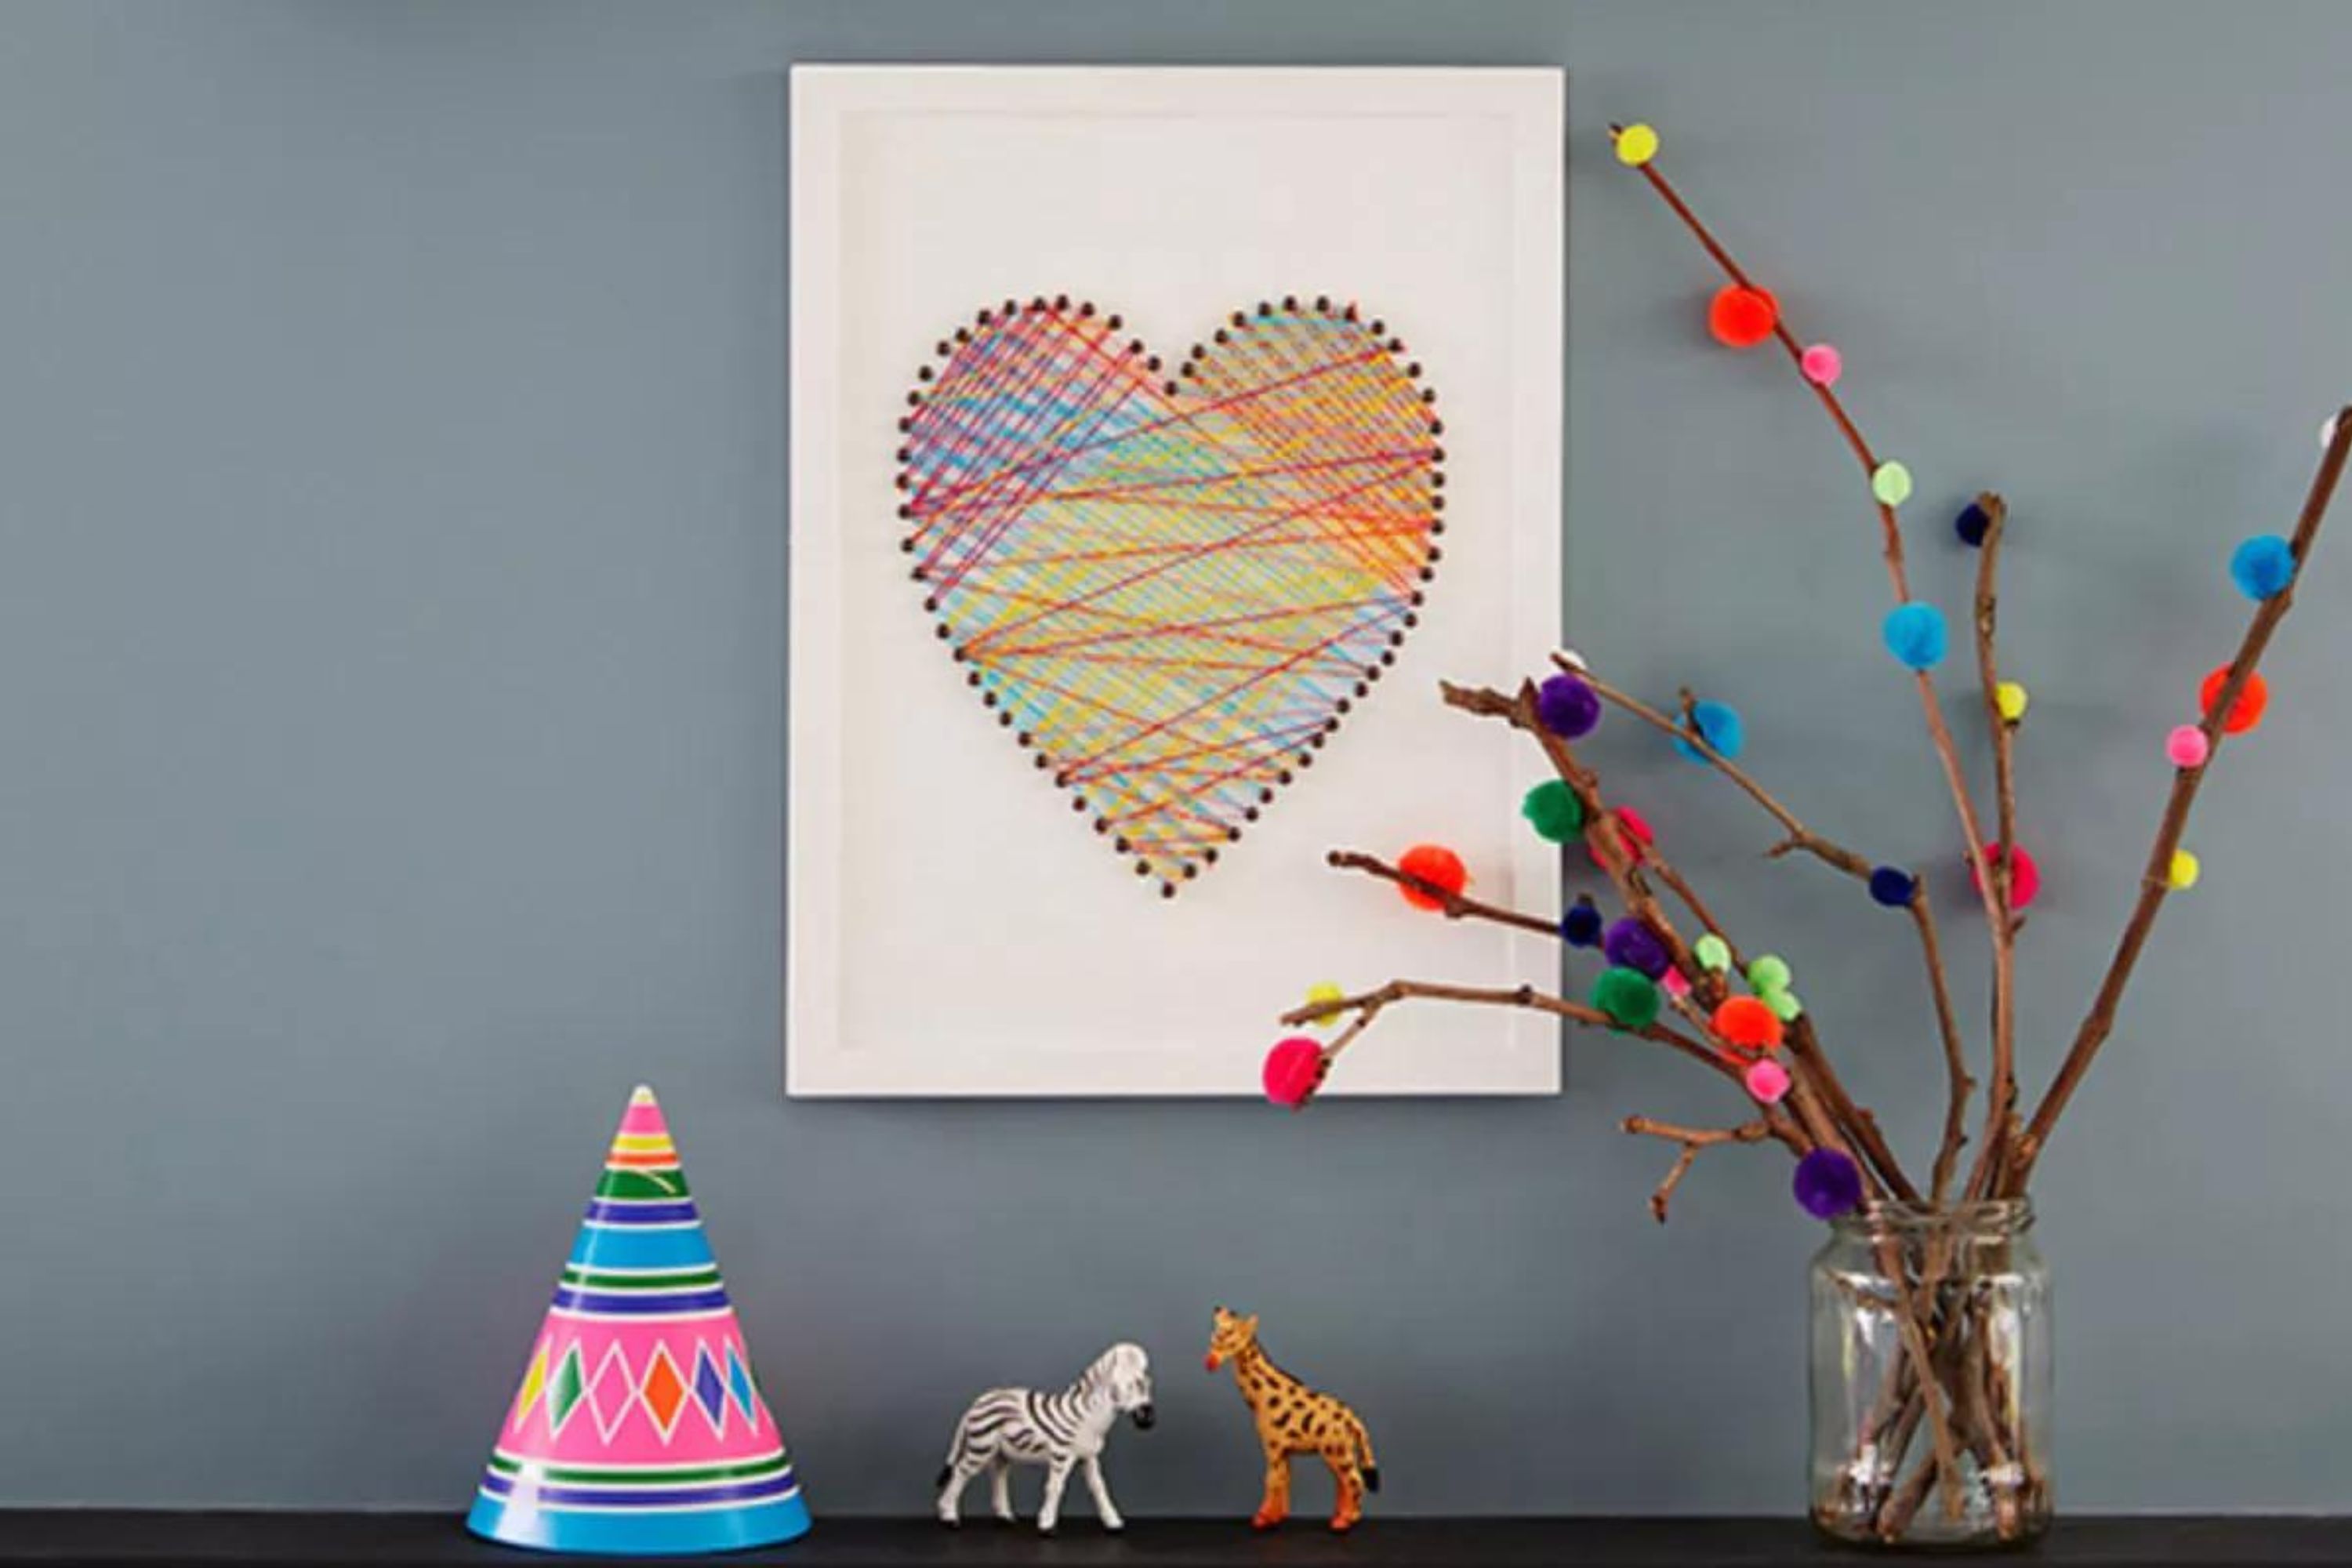 Easy crafts for kids illustrated by String art craft idea